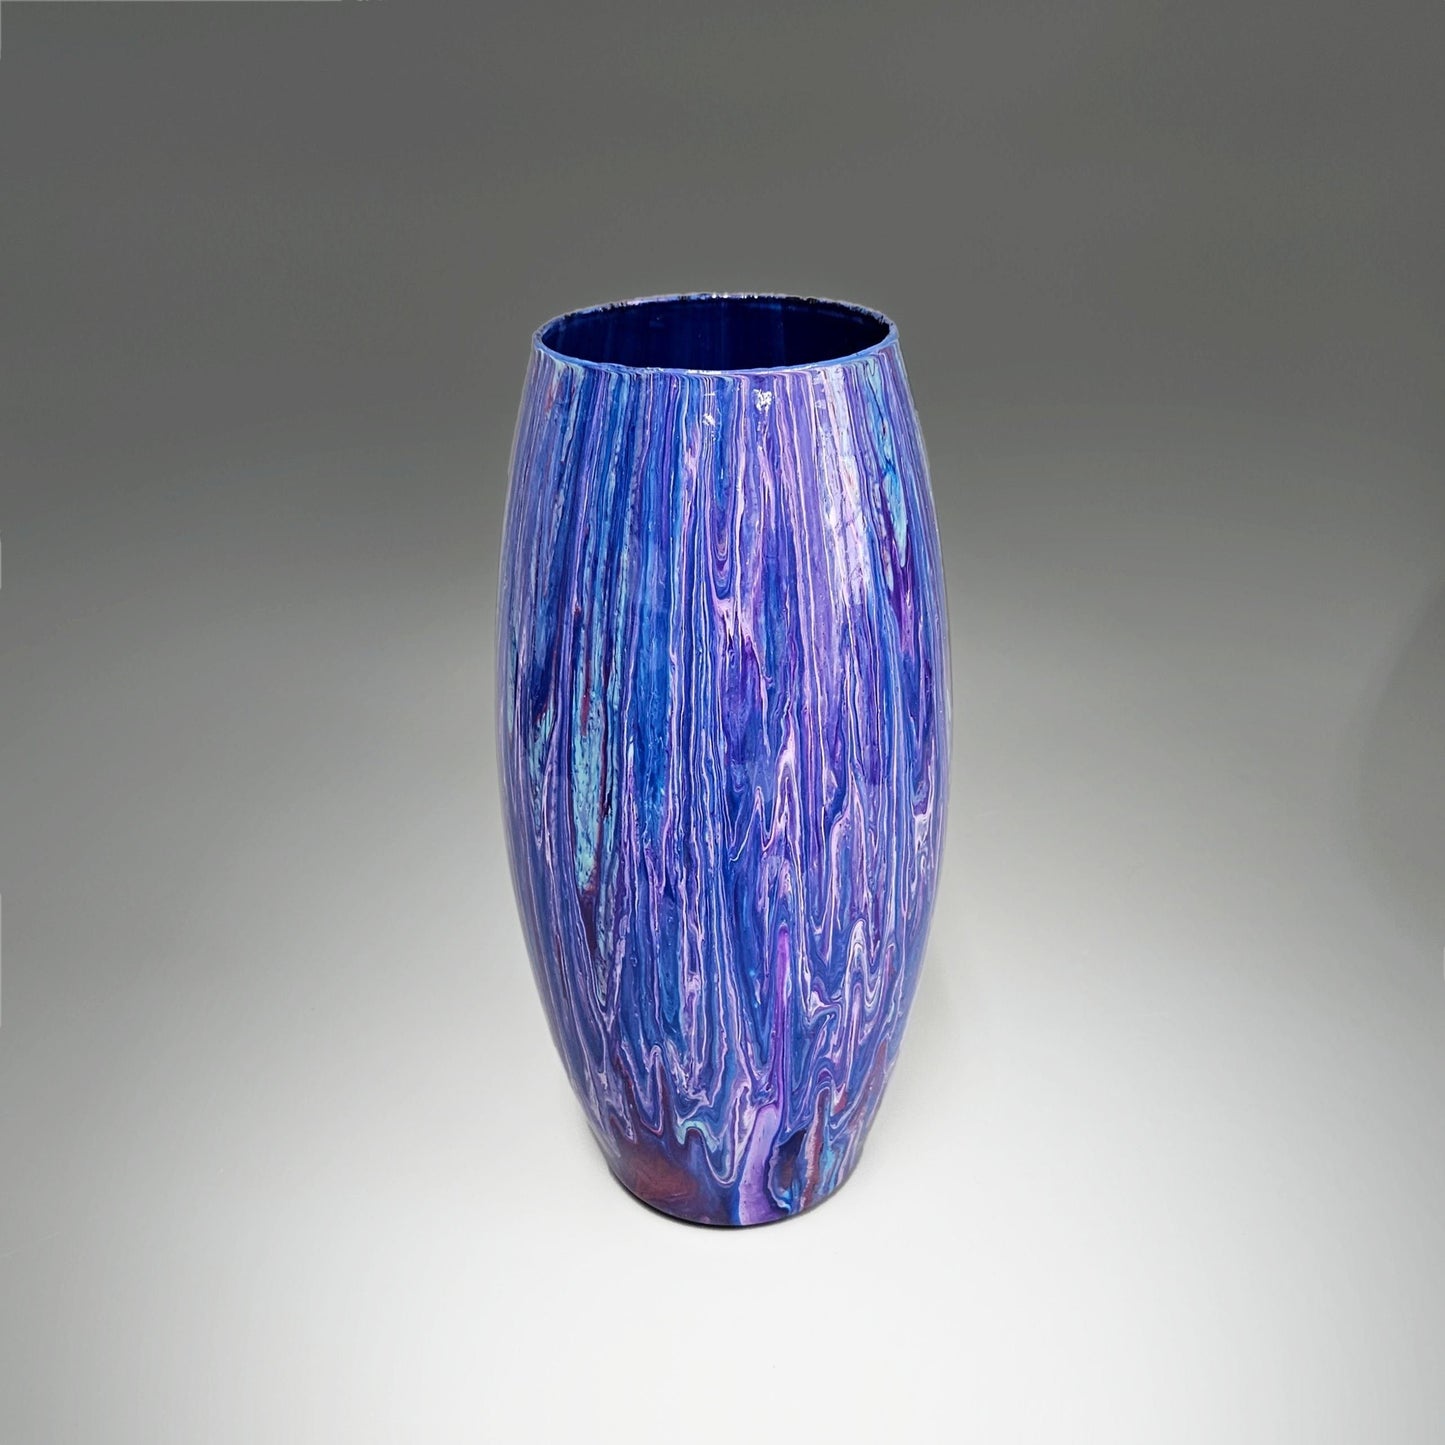 Painted Glass Art Vase in Navy Blue Aqua and Purple